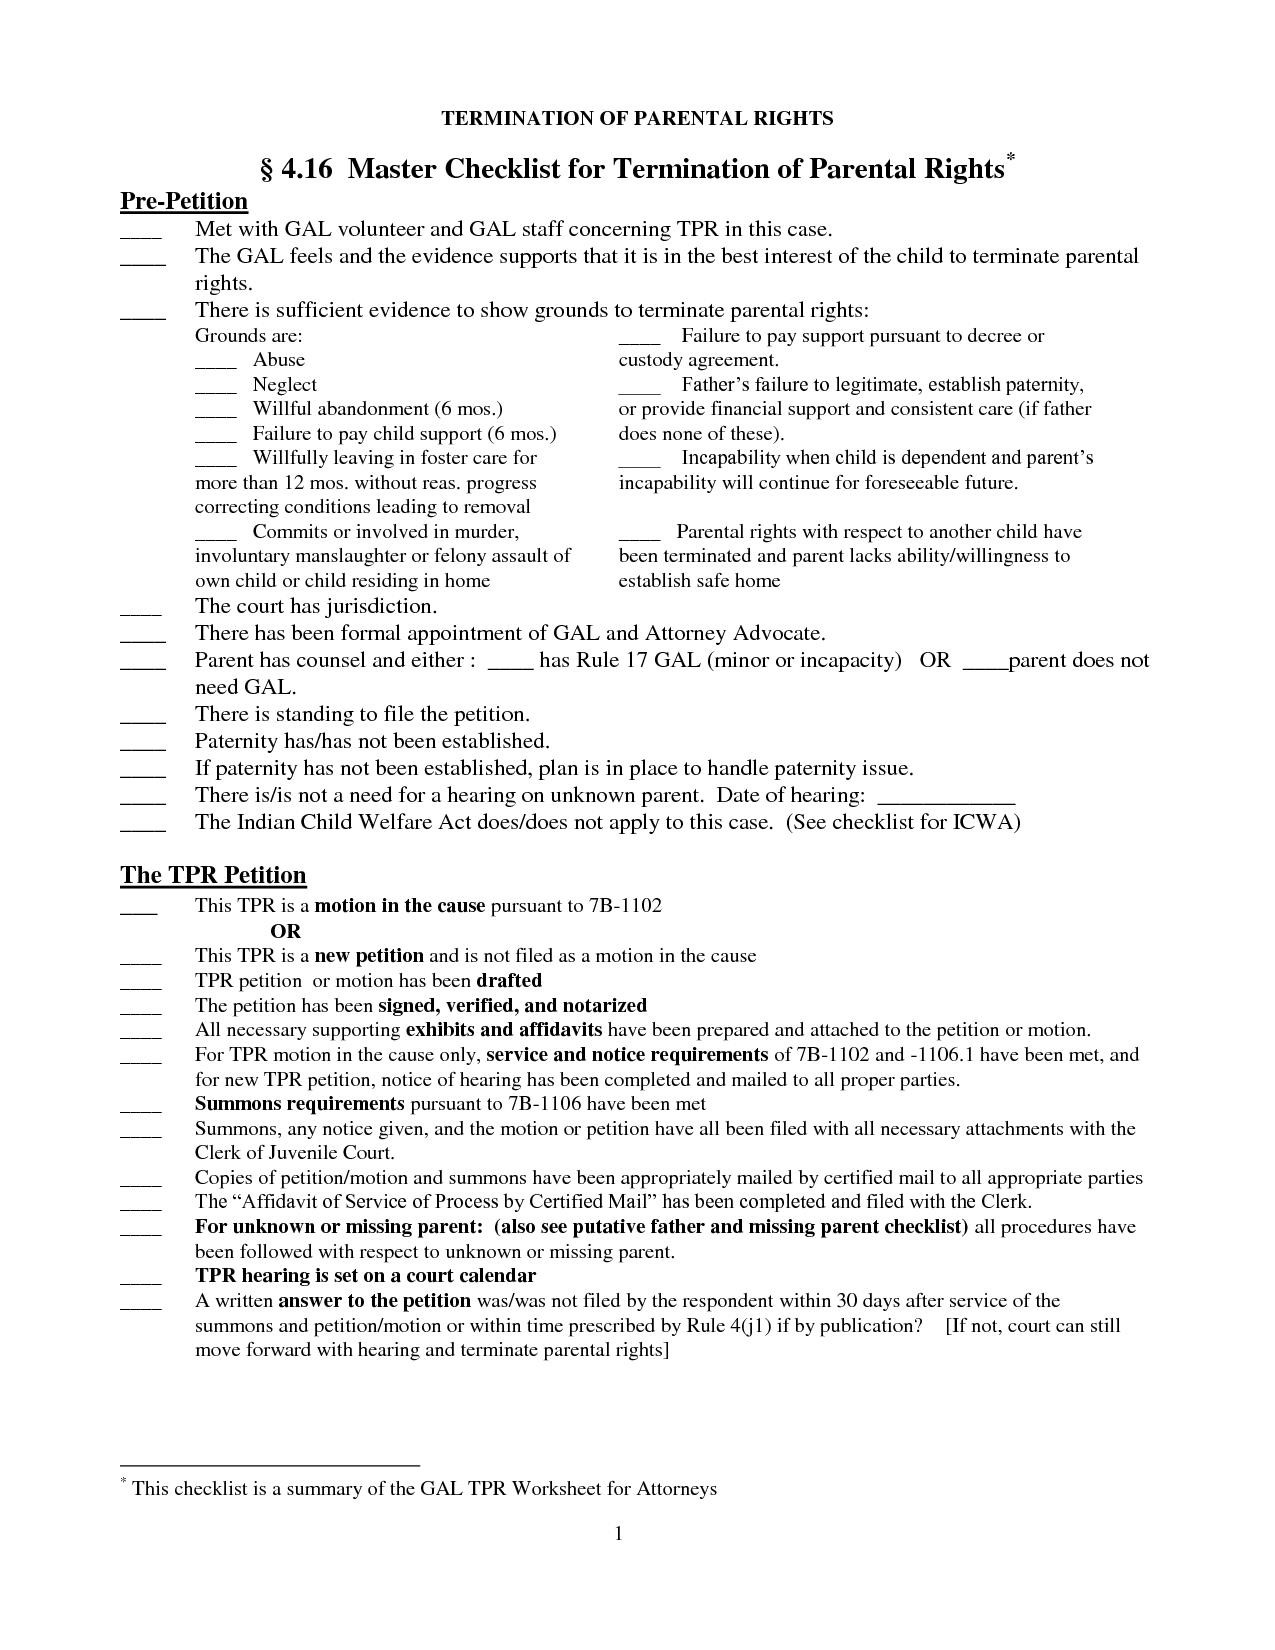 Child Support Letter Of Agreement Template - Private Child Support Agreement Template Professional It Support